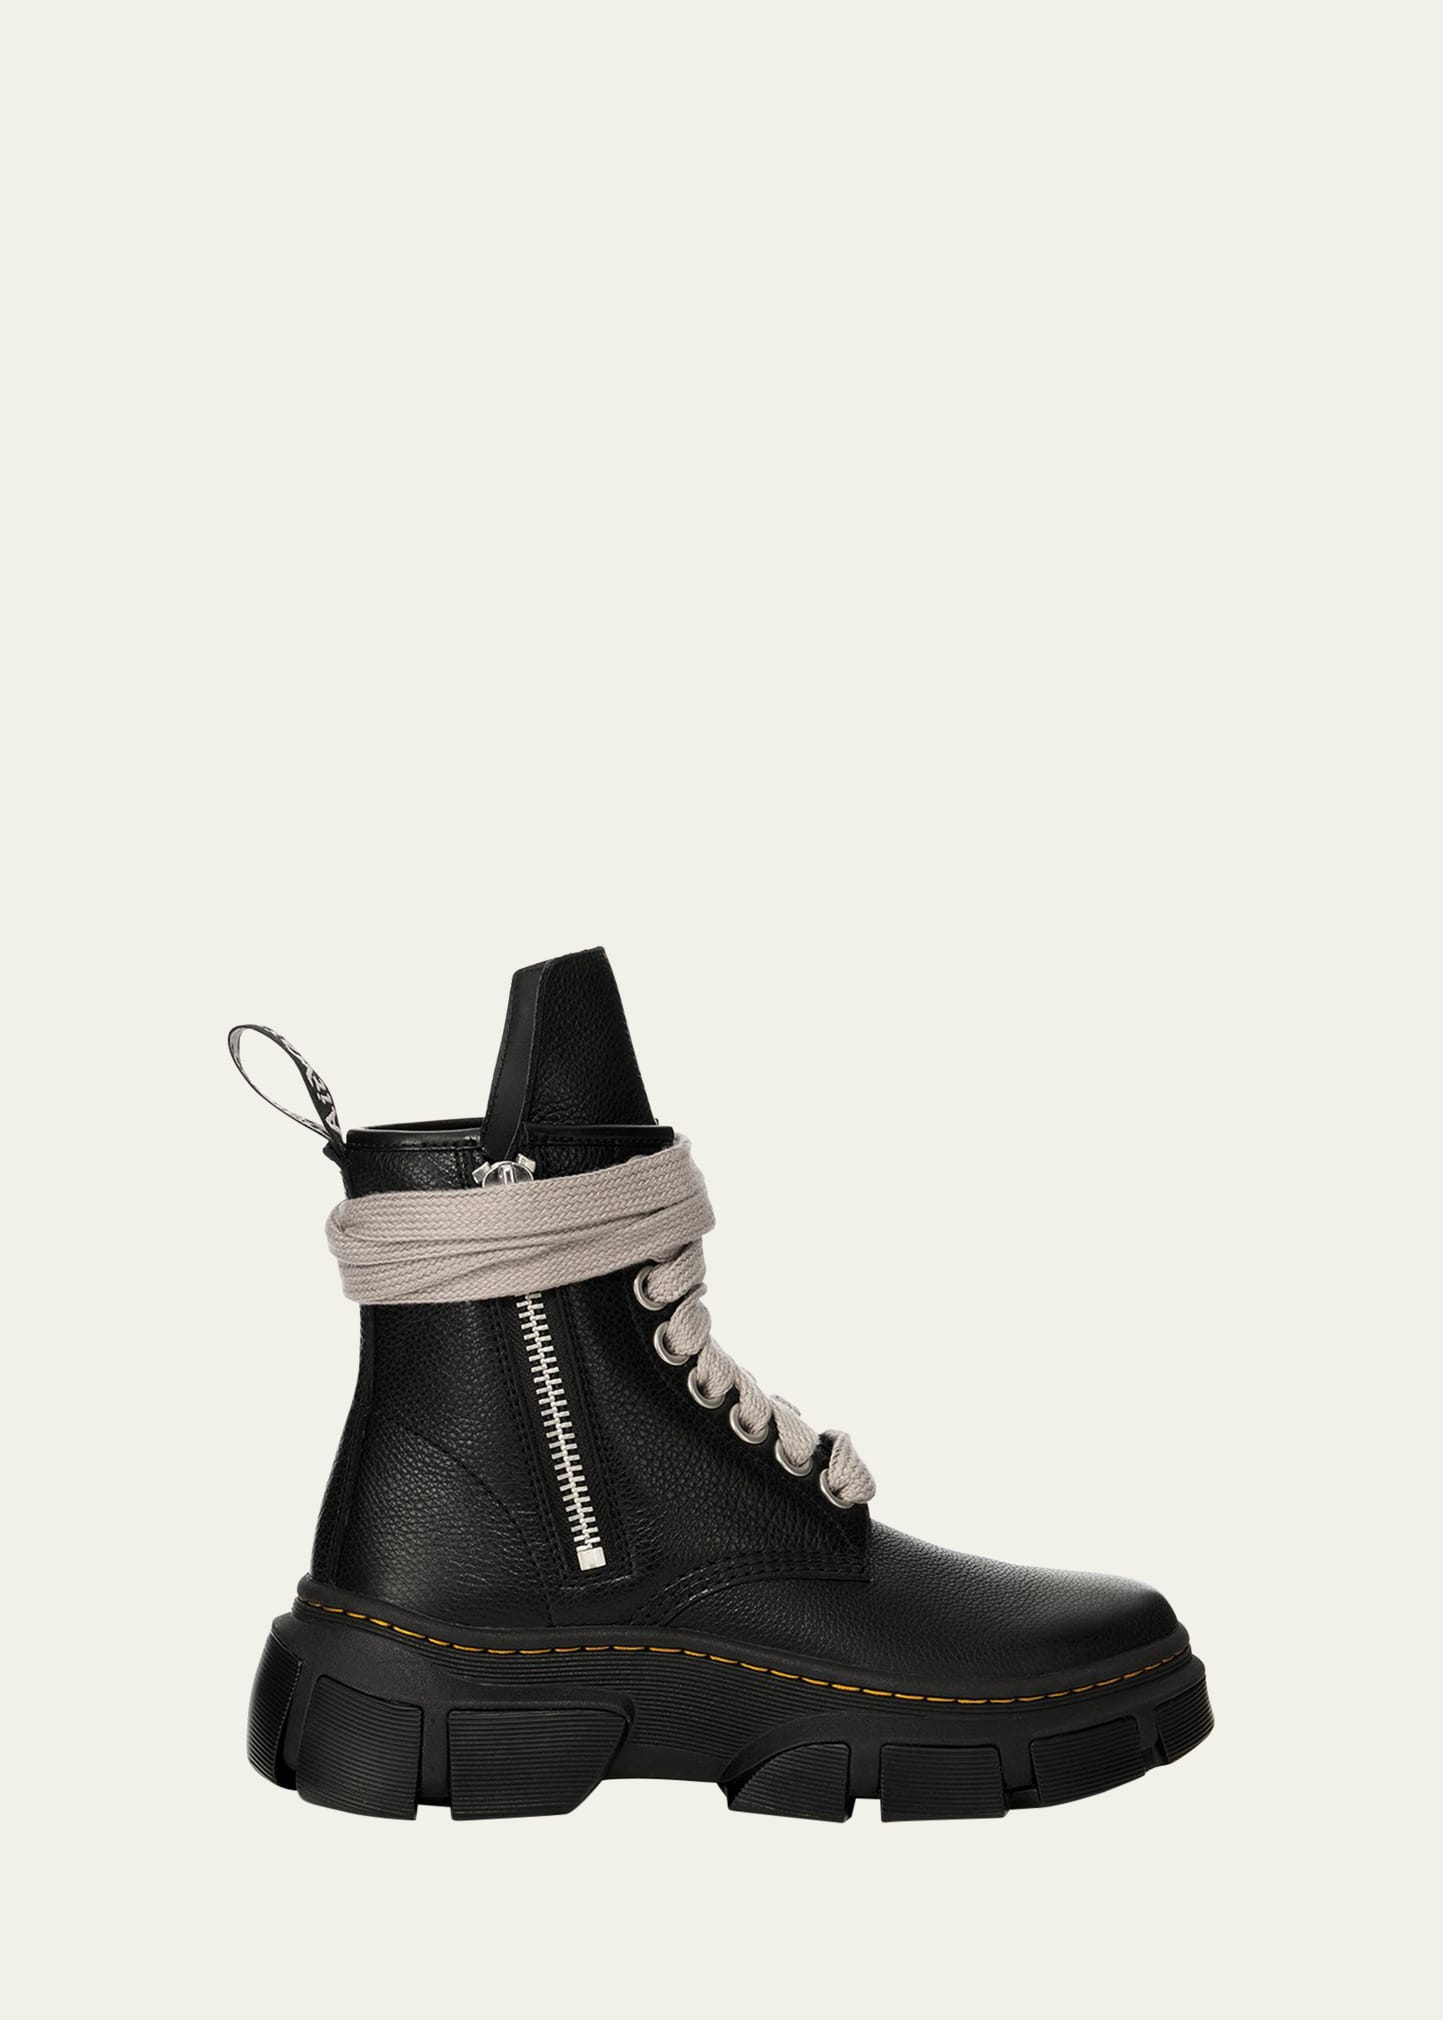 Dr. Martens X Rick Owens X Dr. Martens Leather Jumbo Lace Combat Boots In Black